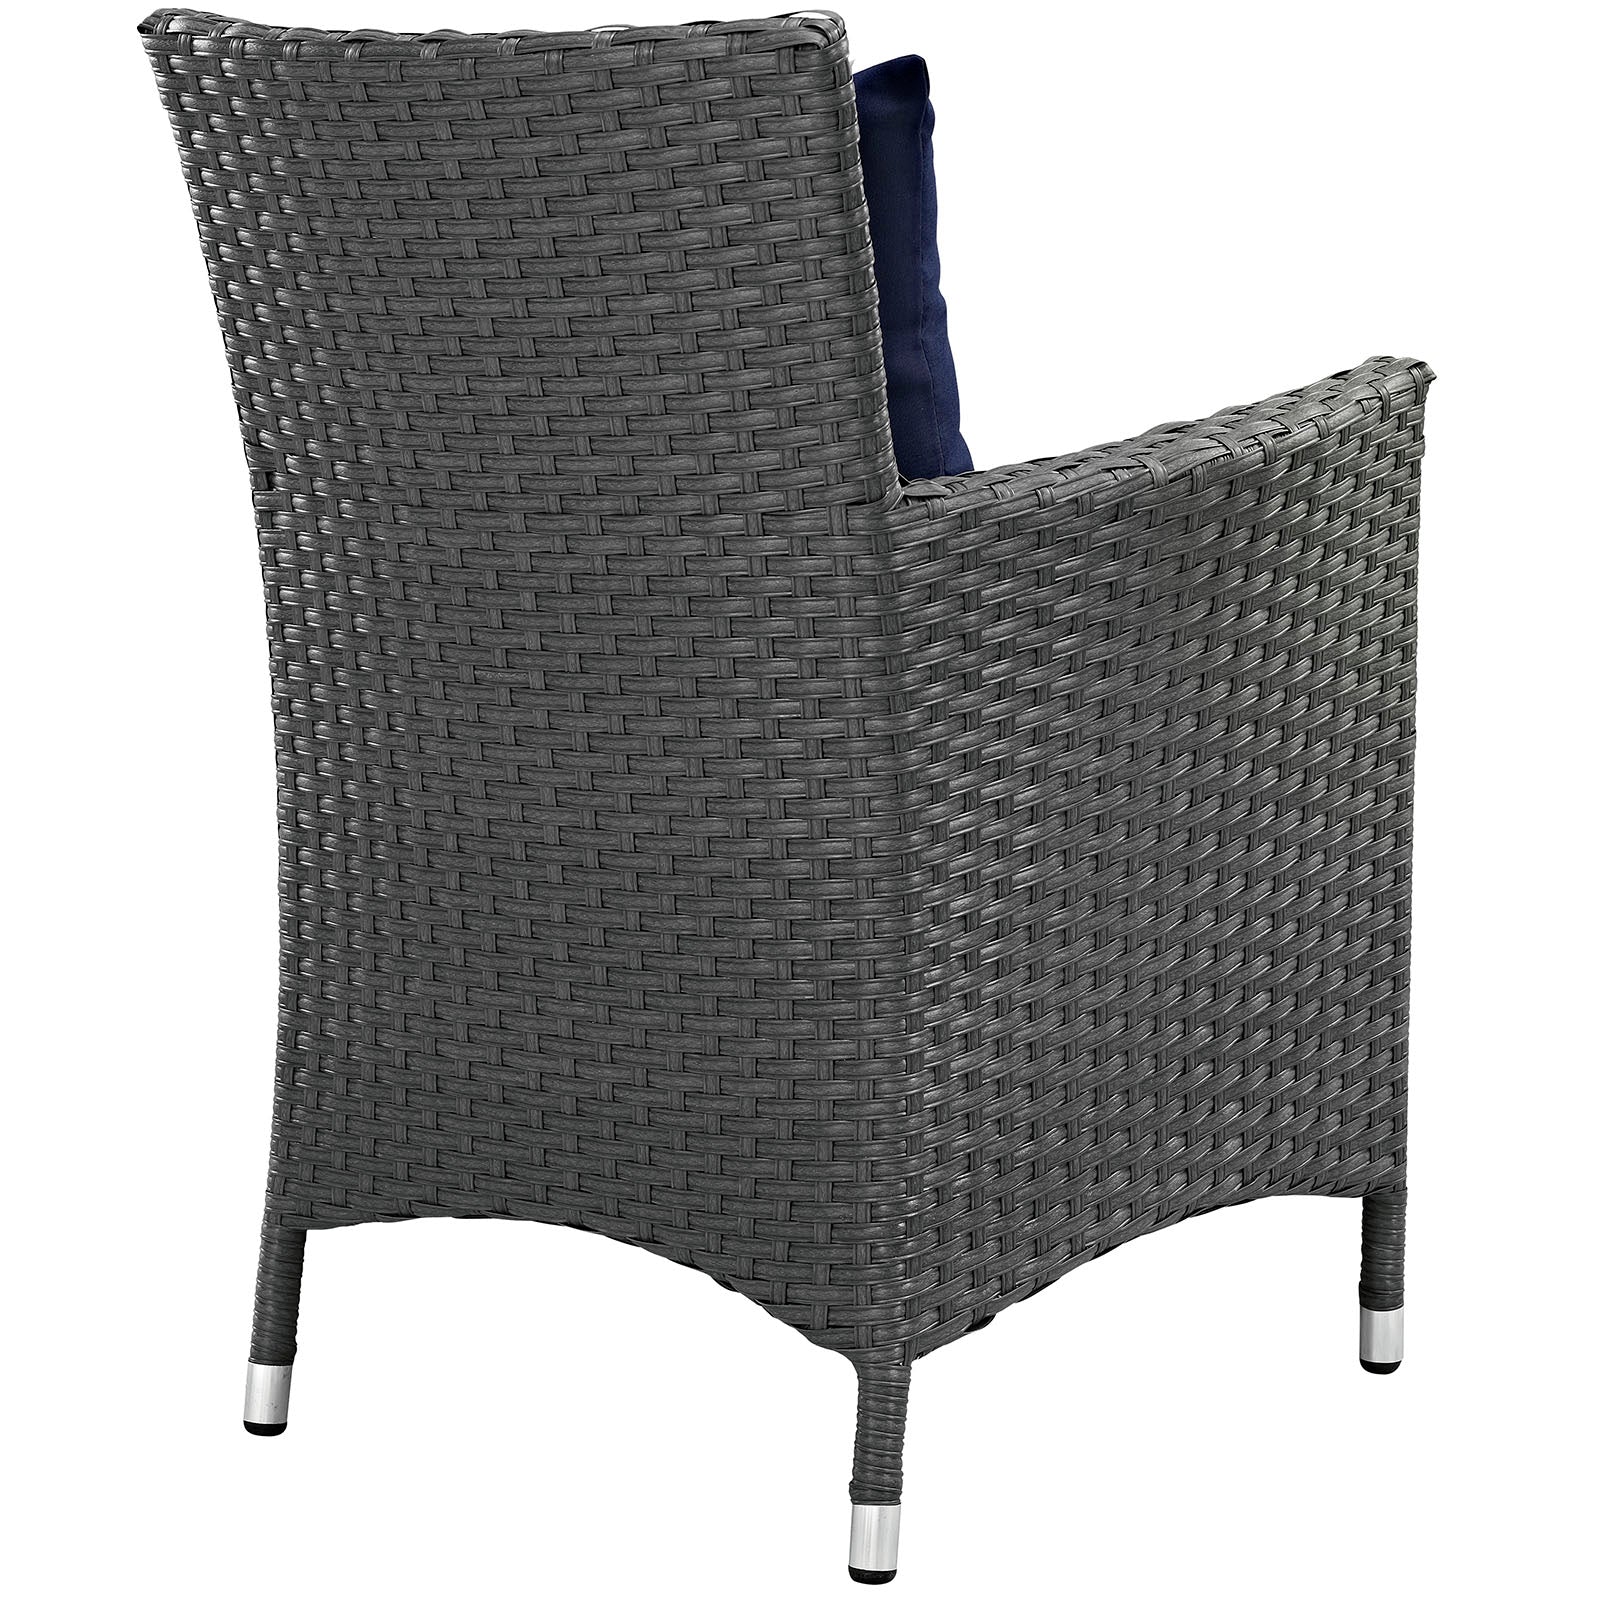 Modway Outdoor Dining Chairs - Sojourn Outdoor Patio Dining Chairs Canvas Navy (Set of 2)